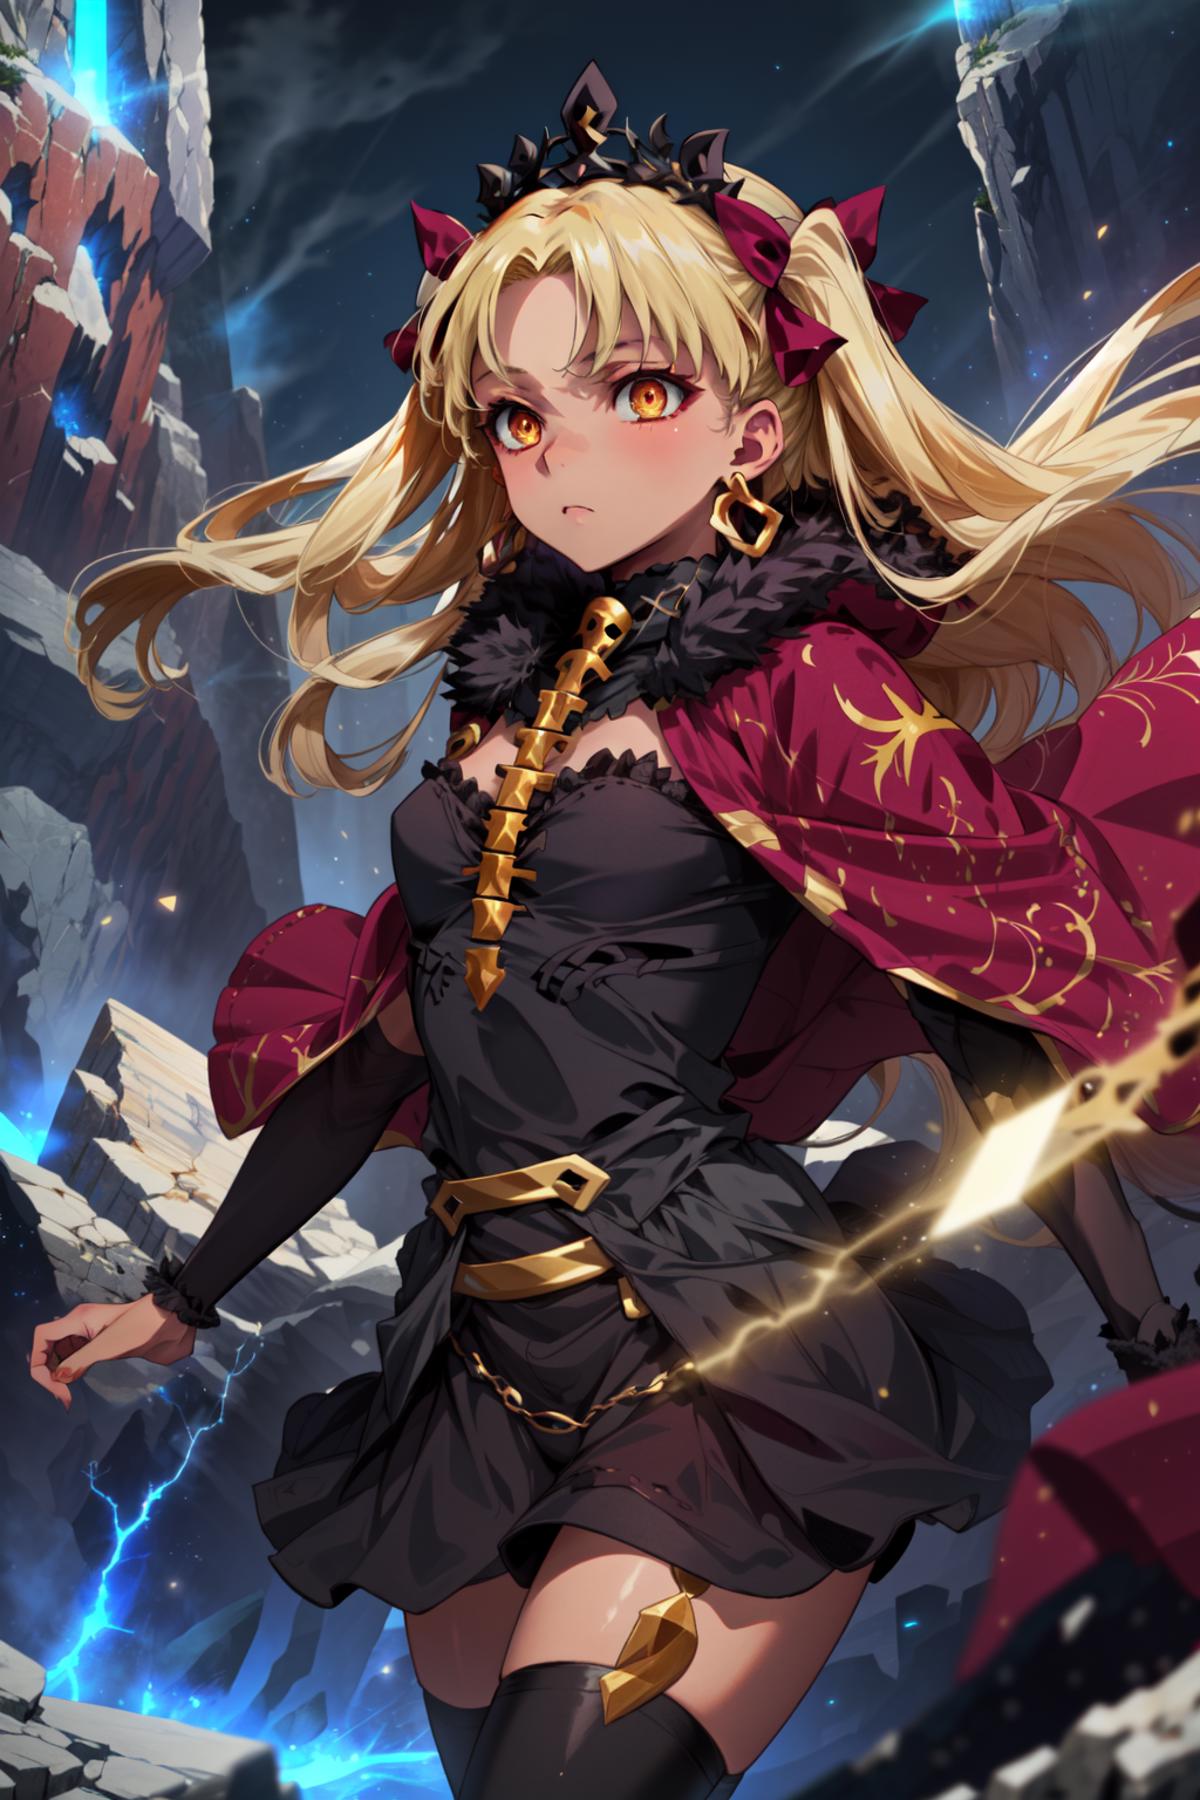 Ereshkigal 14 Outfits (Fate Grand Order) FGO 埃列什基伽勒 14套外观 image by UnknownNo3